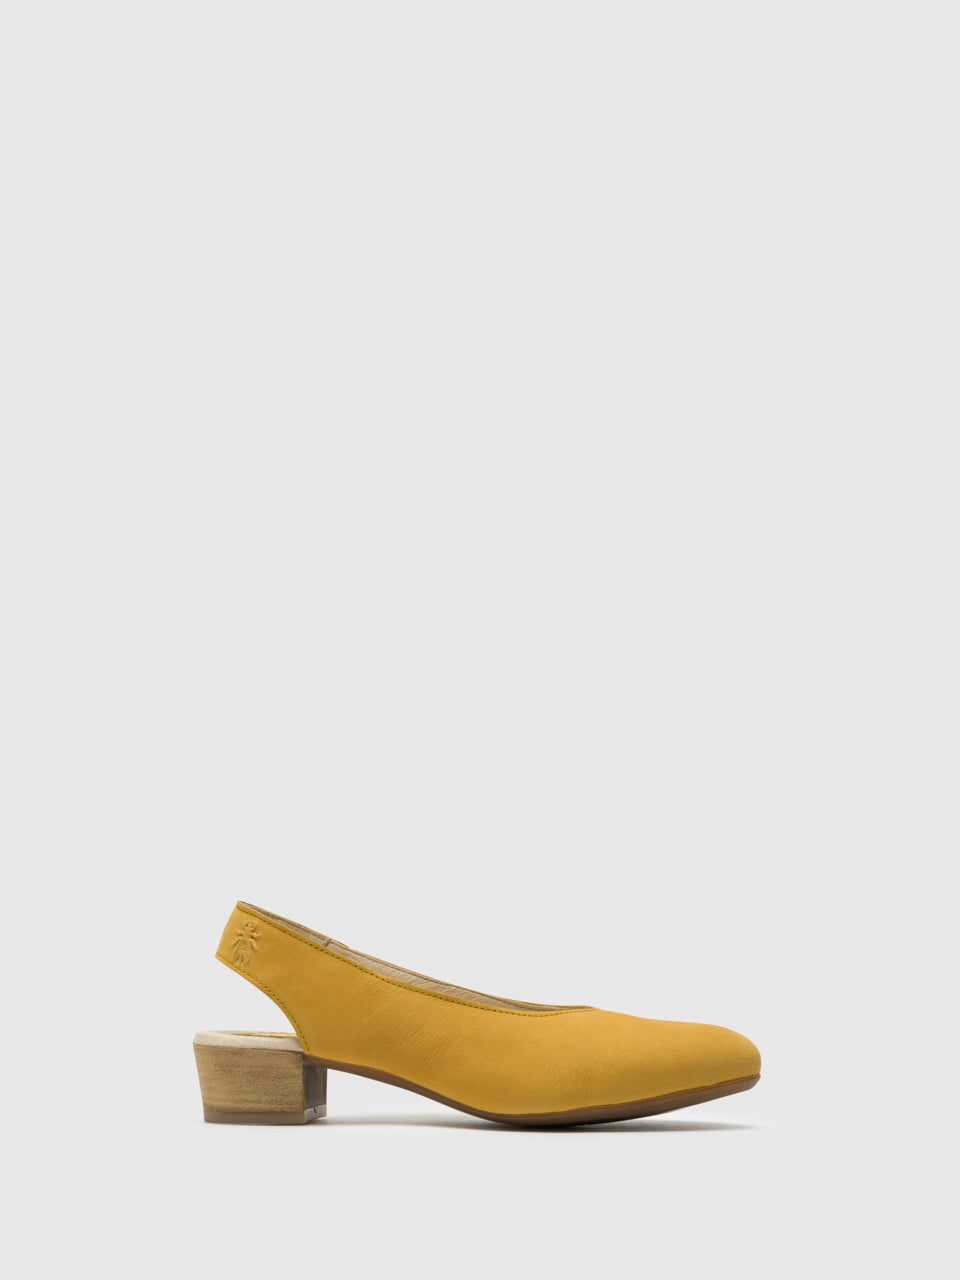 Fly London Yellow Sling-Back Pumps Shoes